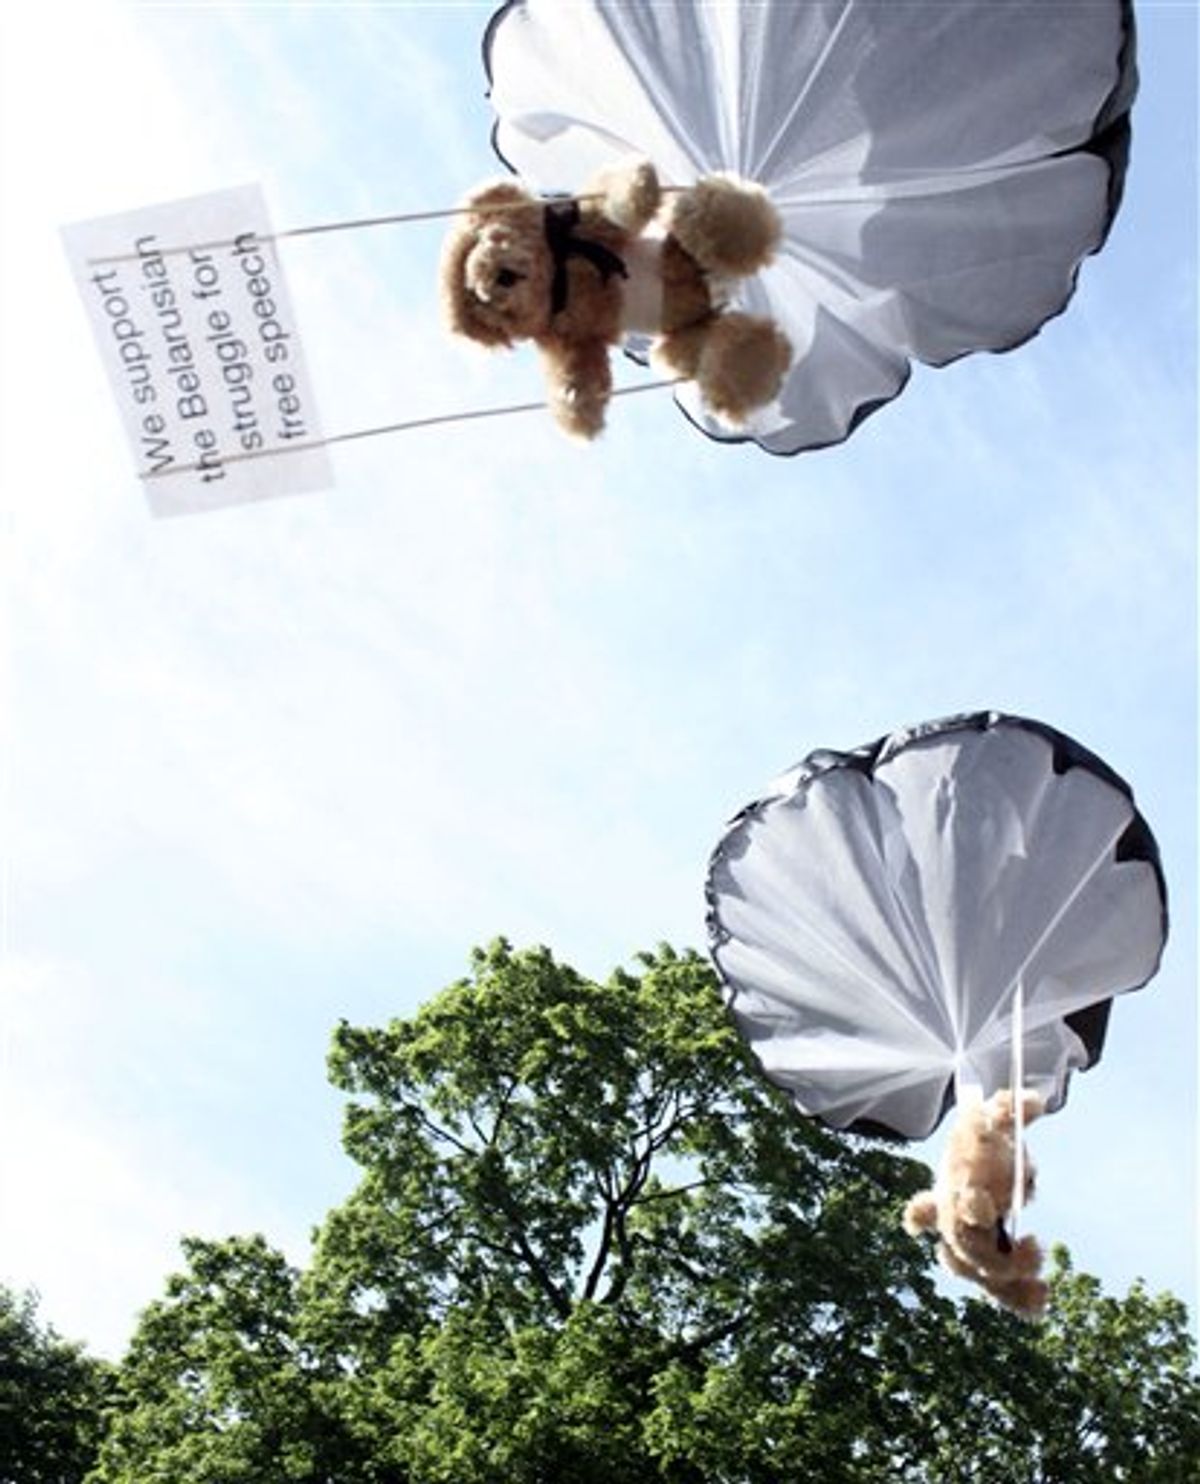 Studio Total teddy bears hang on parachutes during a training in Stockholm, Sweden. (AP/Studio Total/Per Cromwell)     